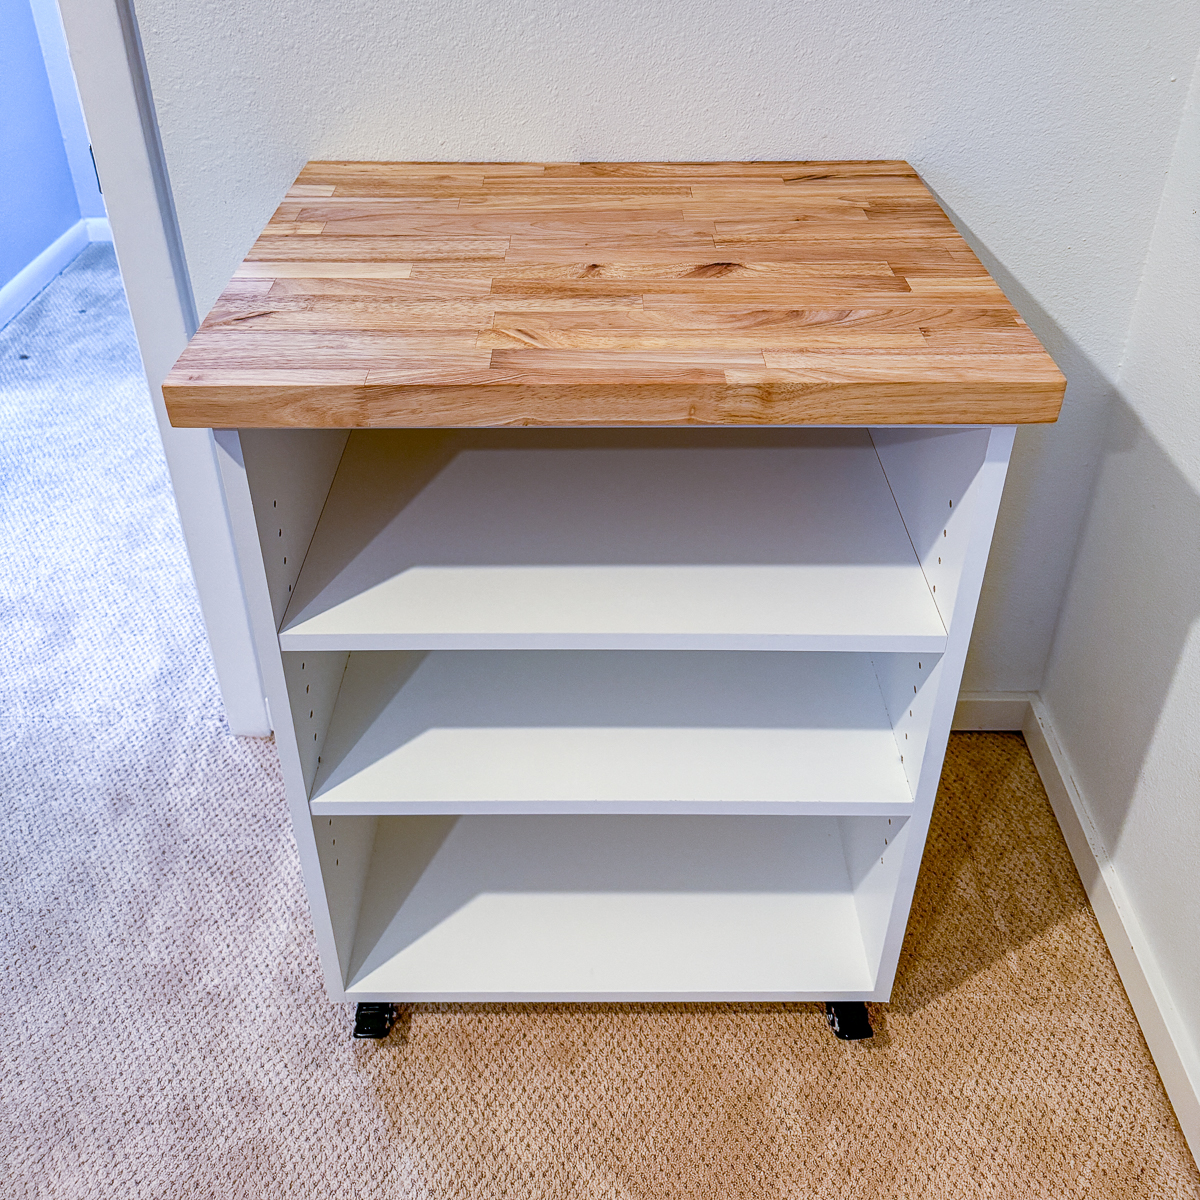 DIY craft cabinet with shelves